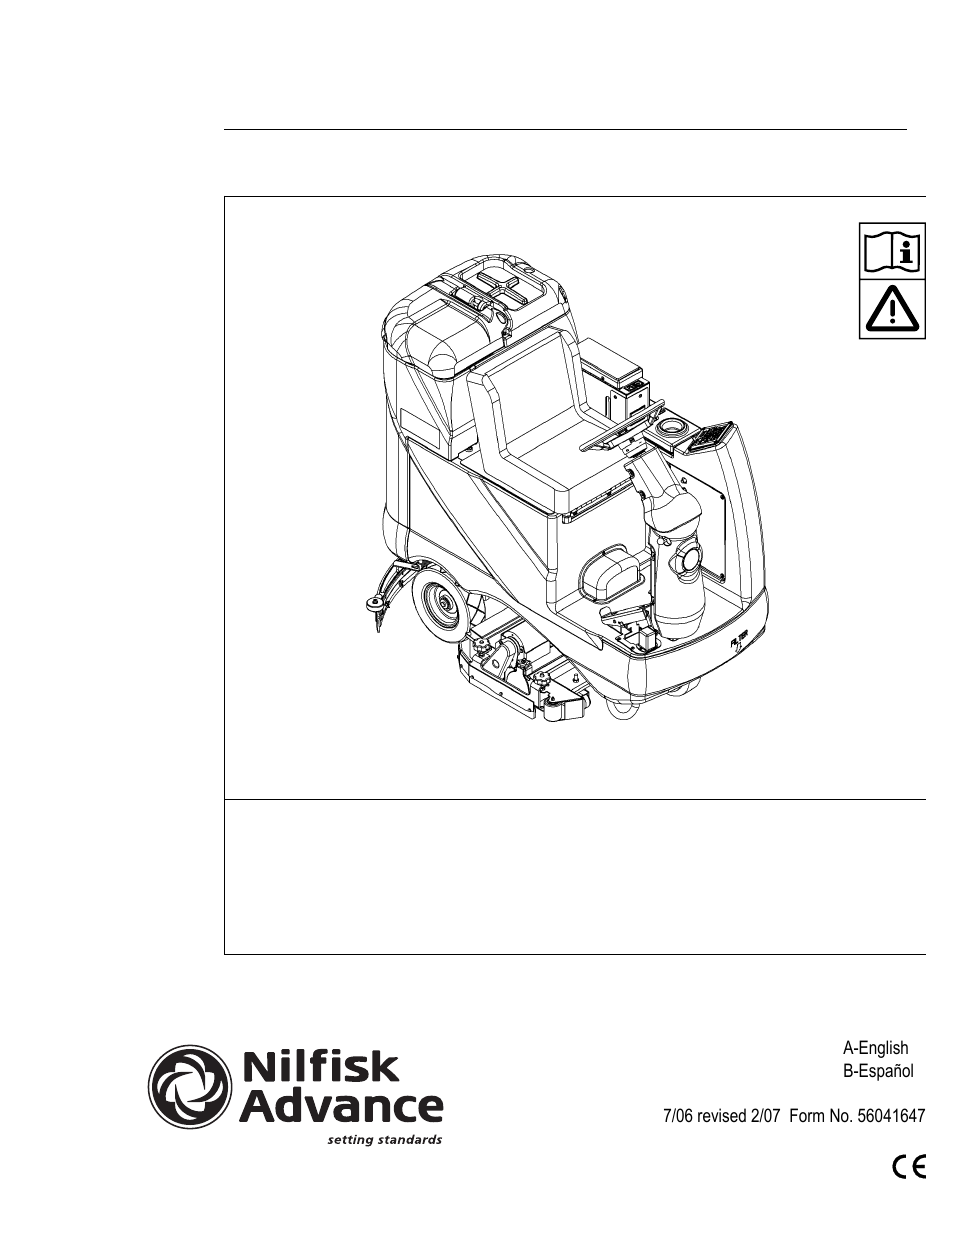 Nilfisk-Advance America 56316025 (R32-C) User Manual | 36 pages